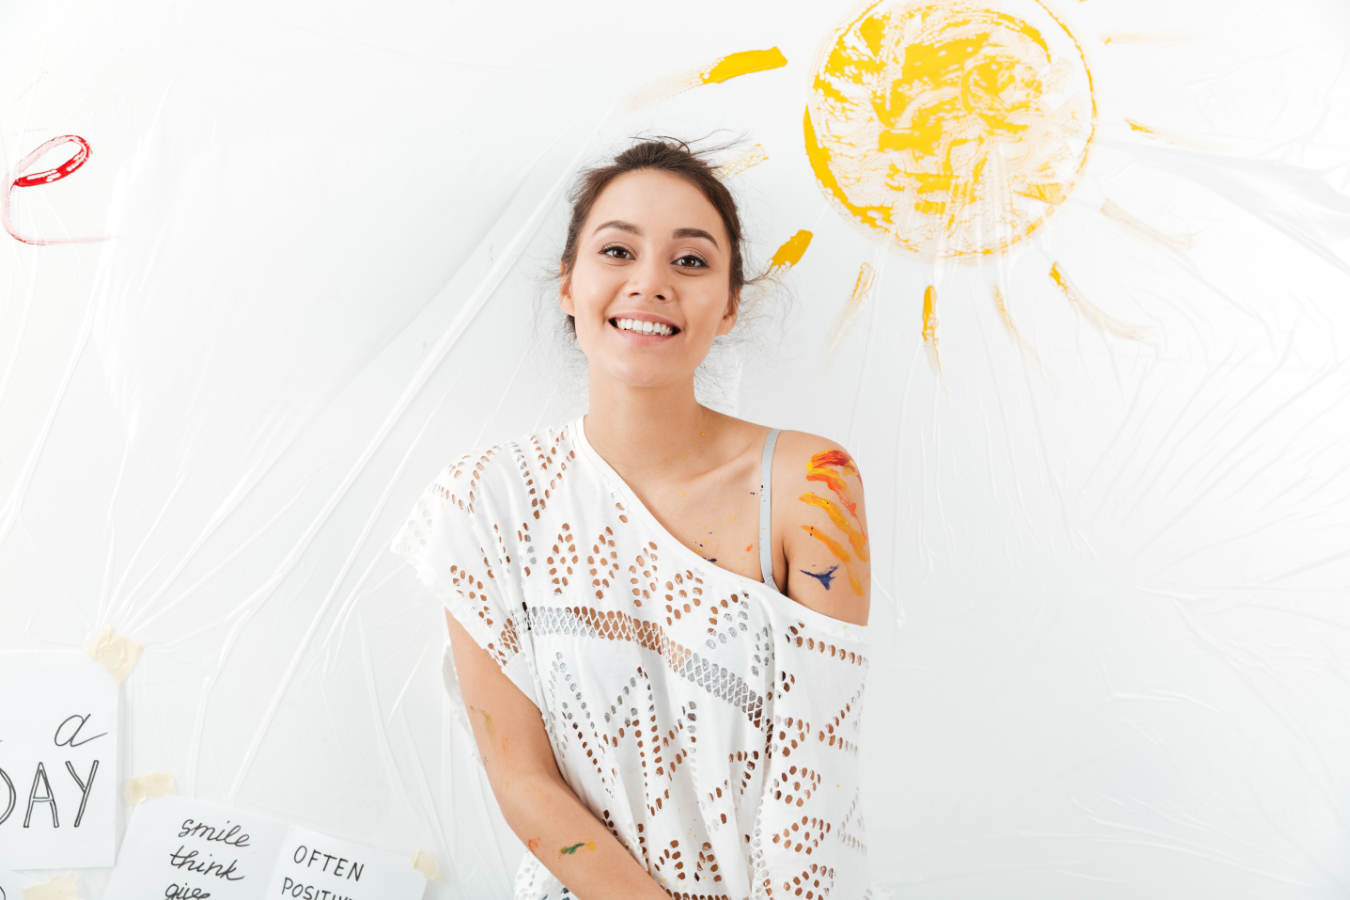 Smiling young woman in white shirt with sun painted behind her